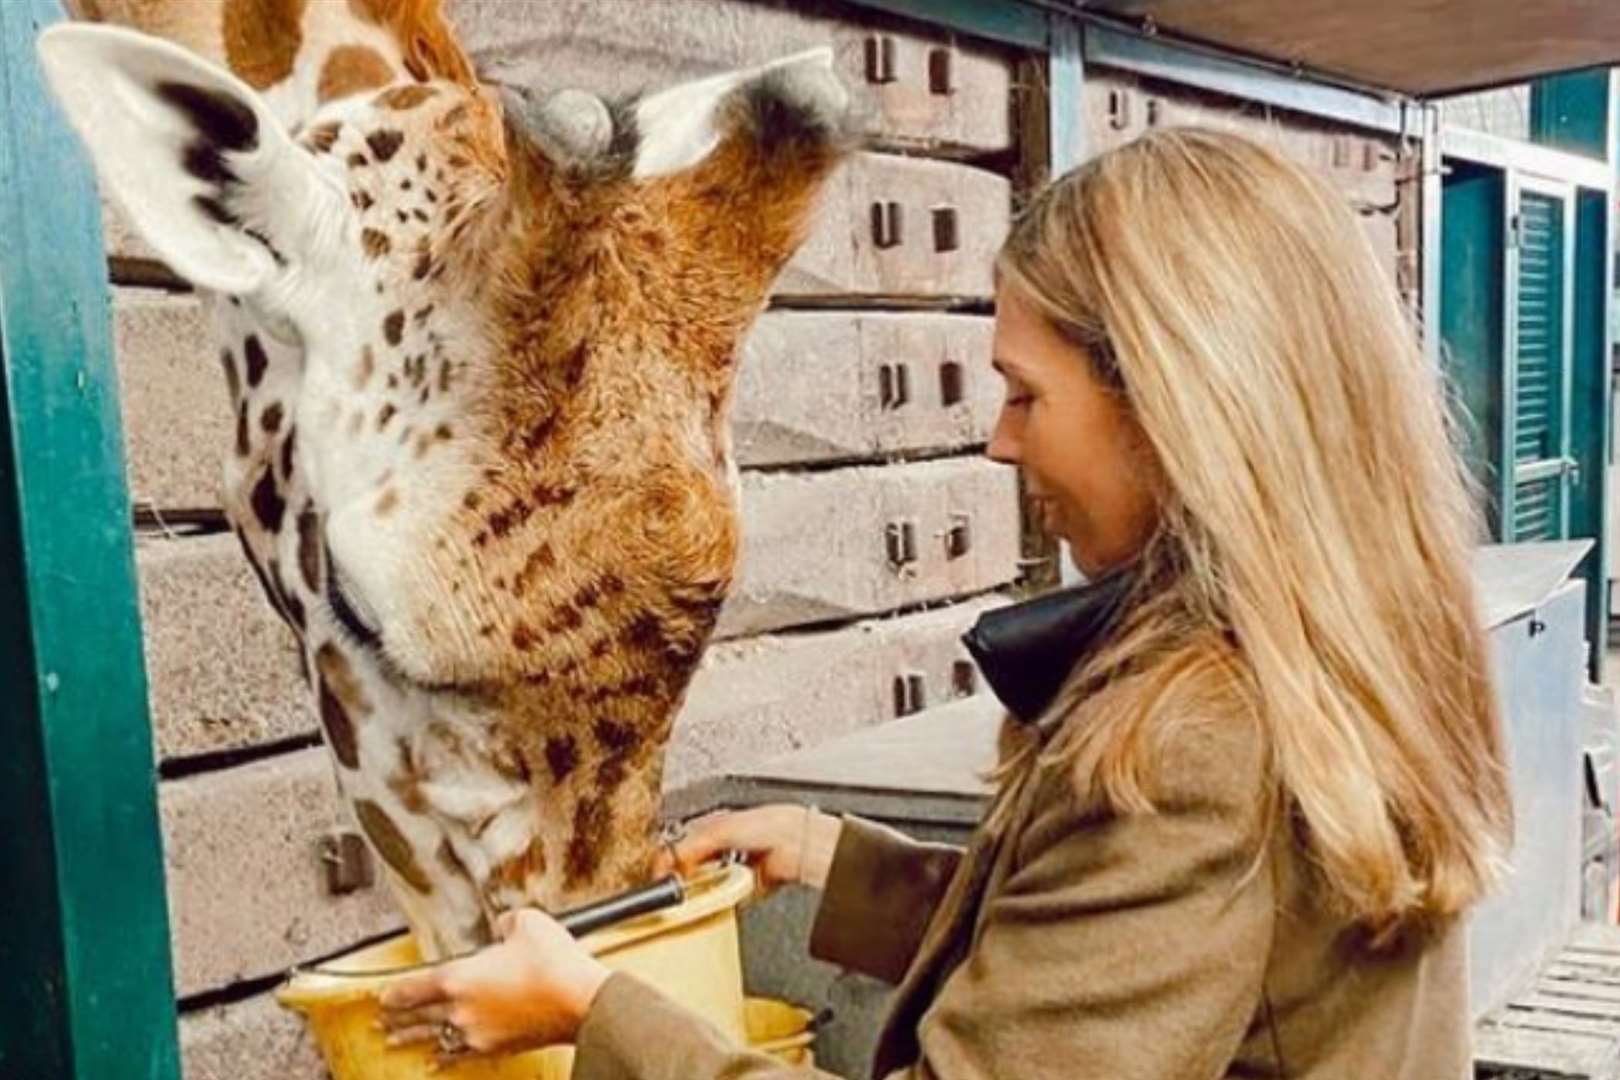 Carrie Johnson is head of communications for the Aspinall Foundation, which runs Howletts and Port Lympne.. Picture: Carrie Johnson on Instagram